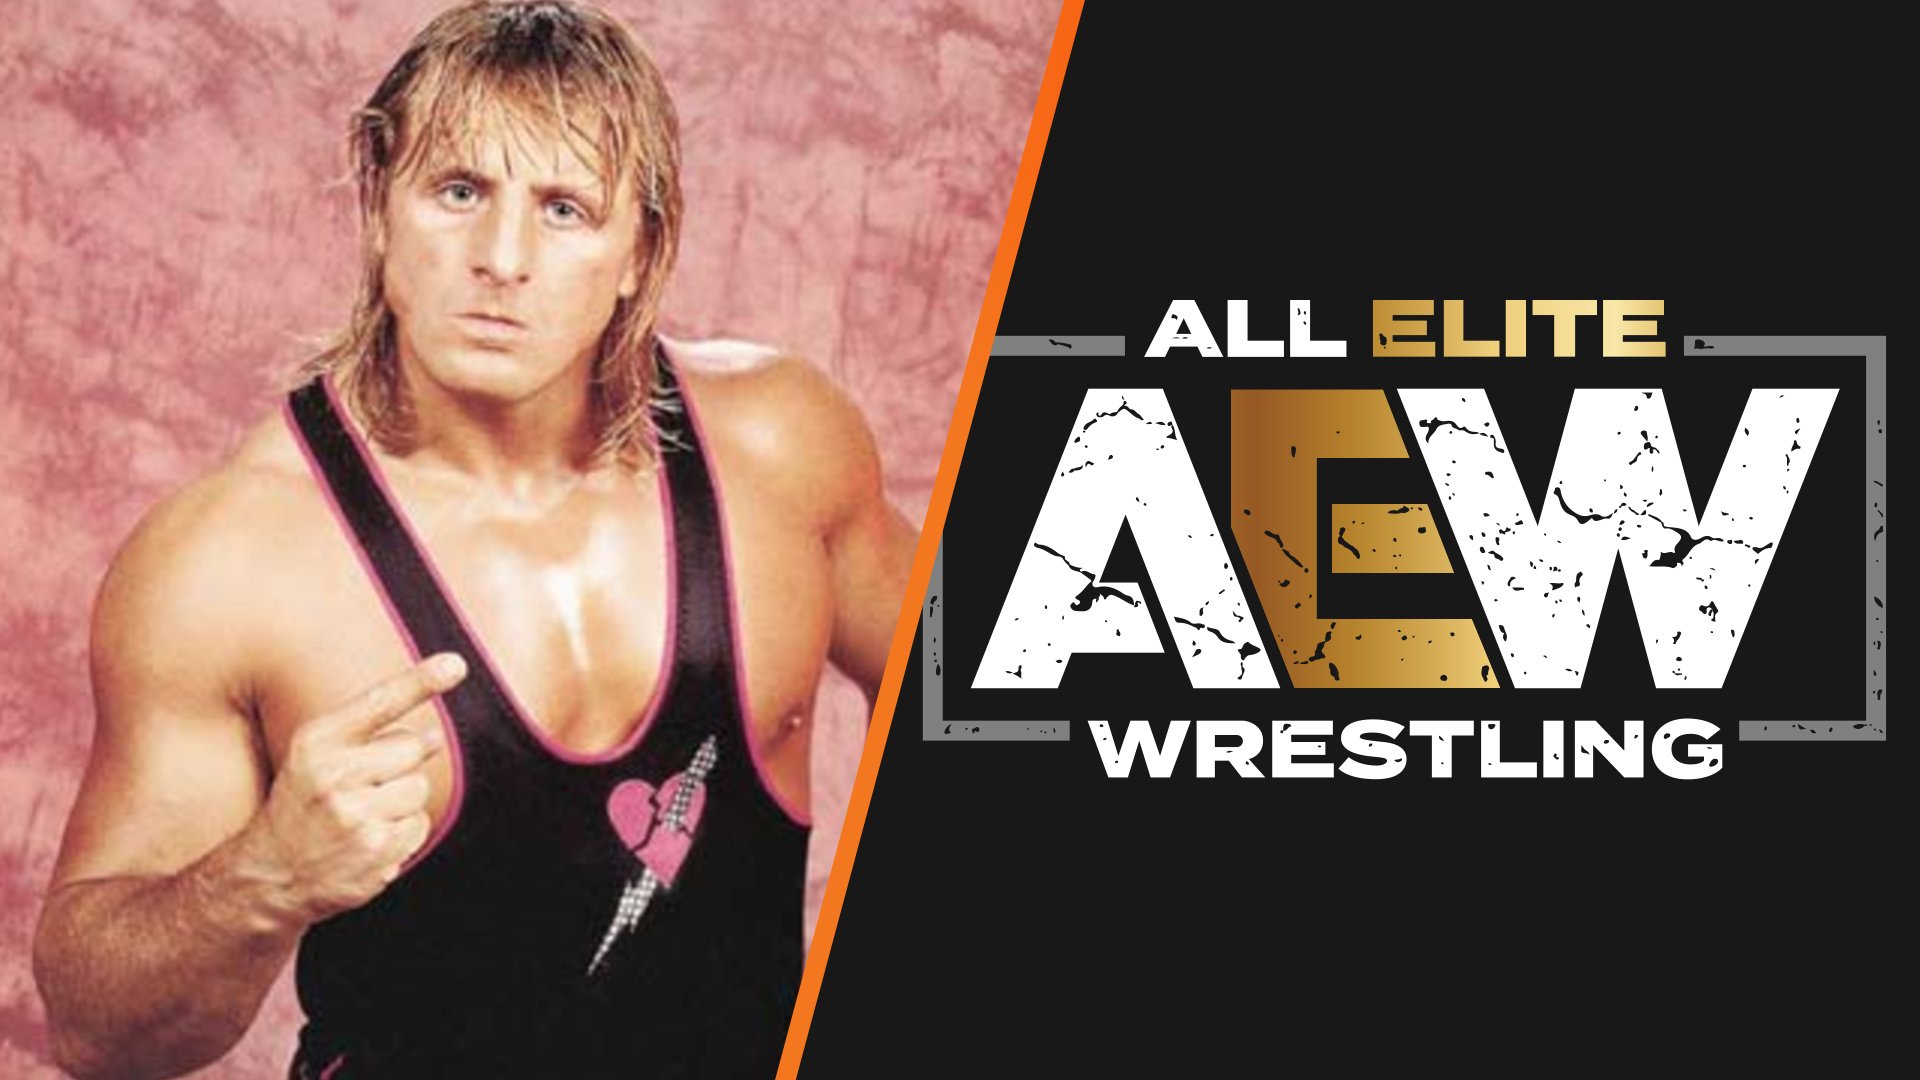 20 Years Ago Today: The Life and Death of Owen Hart